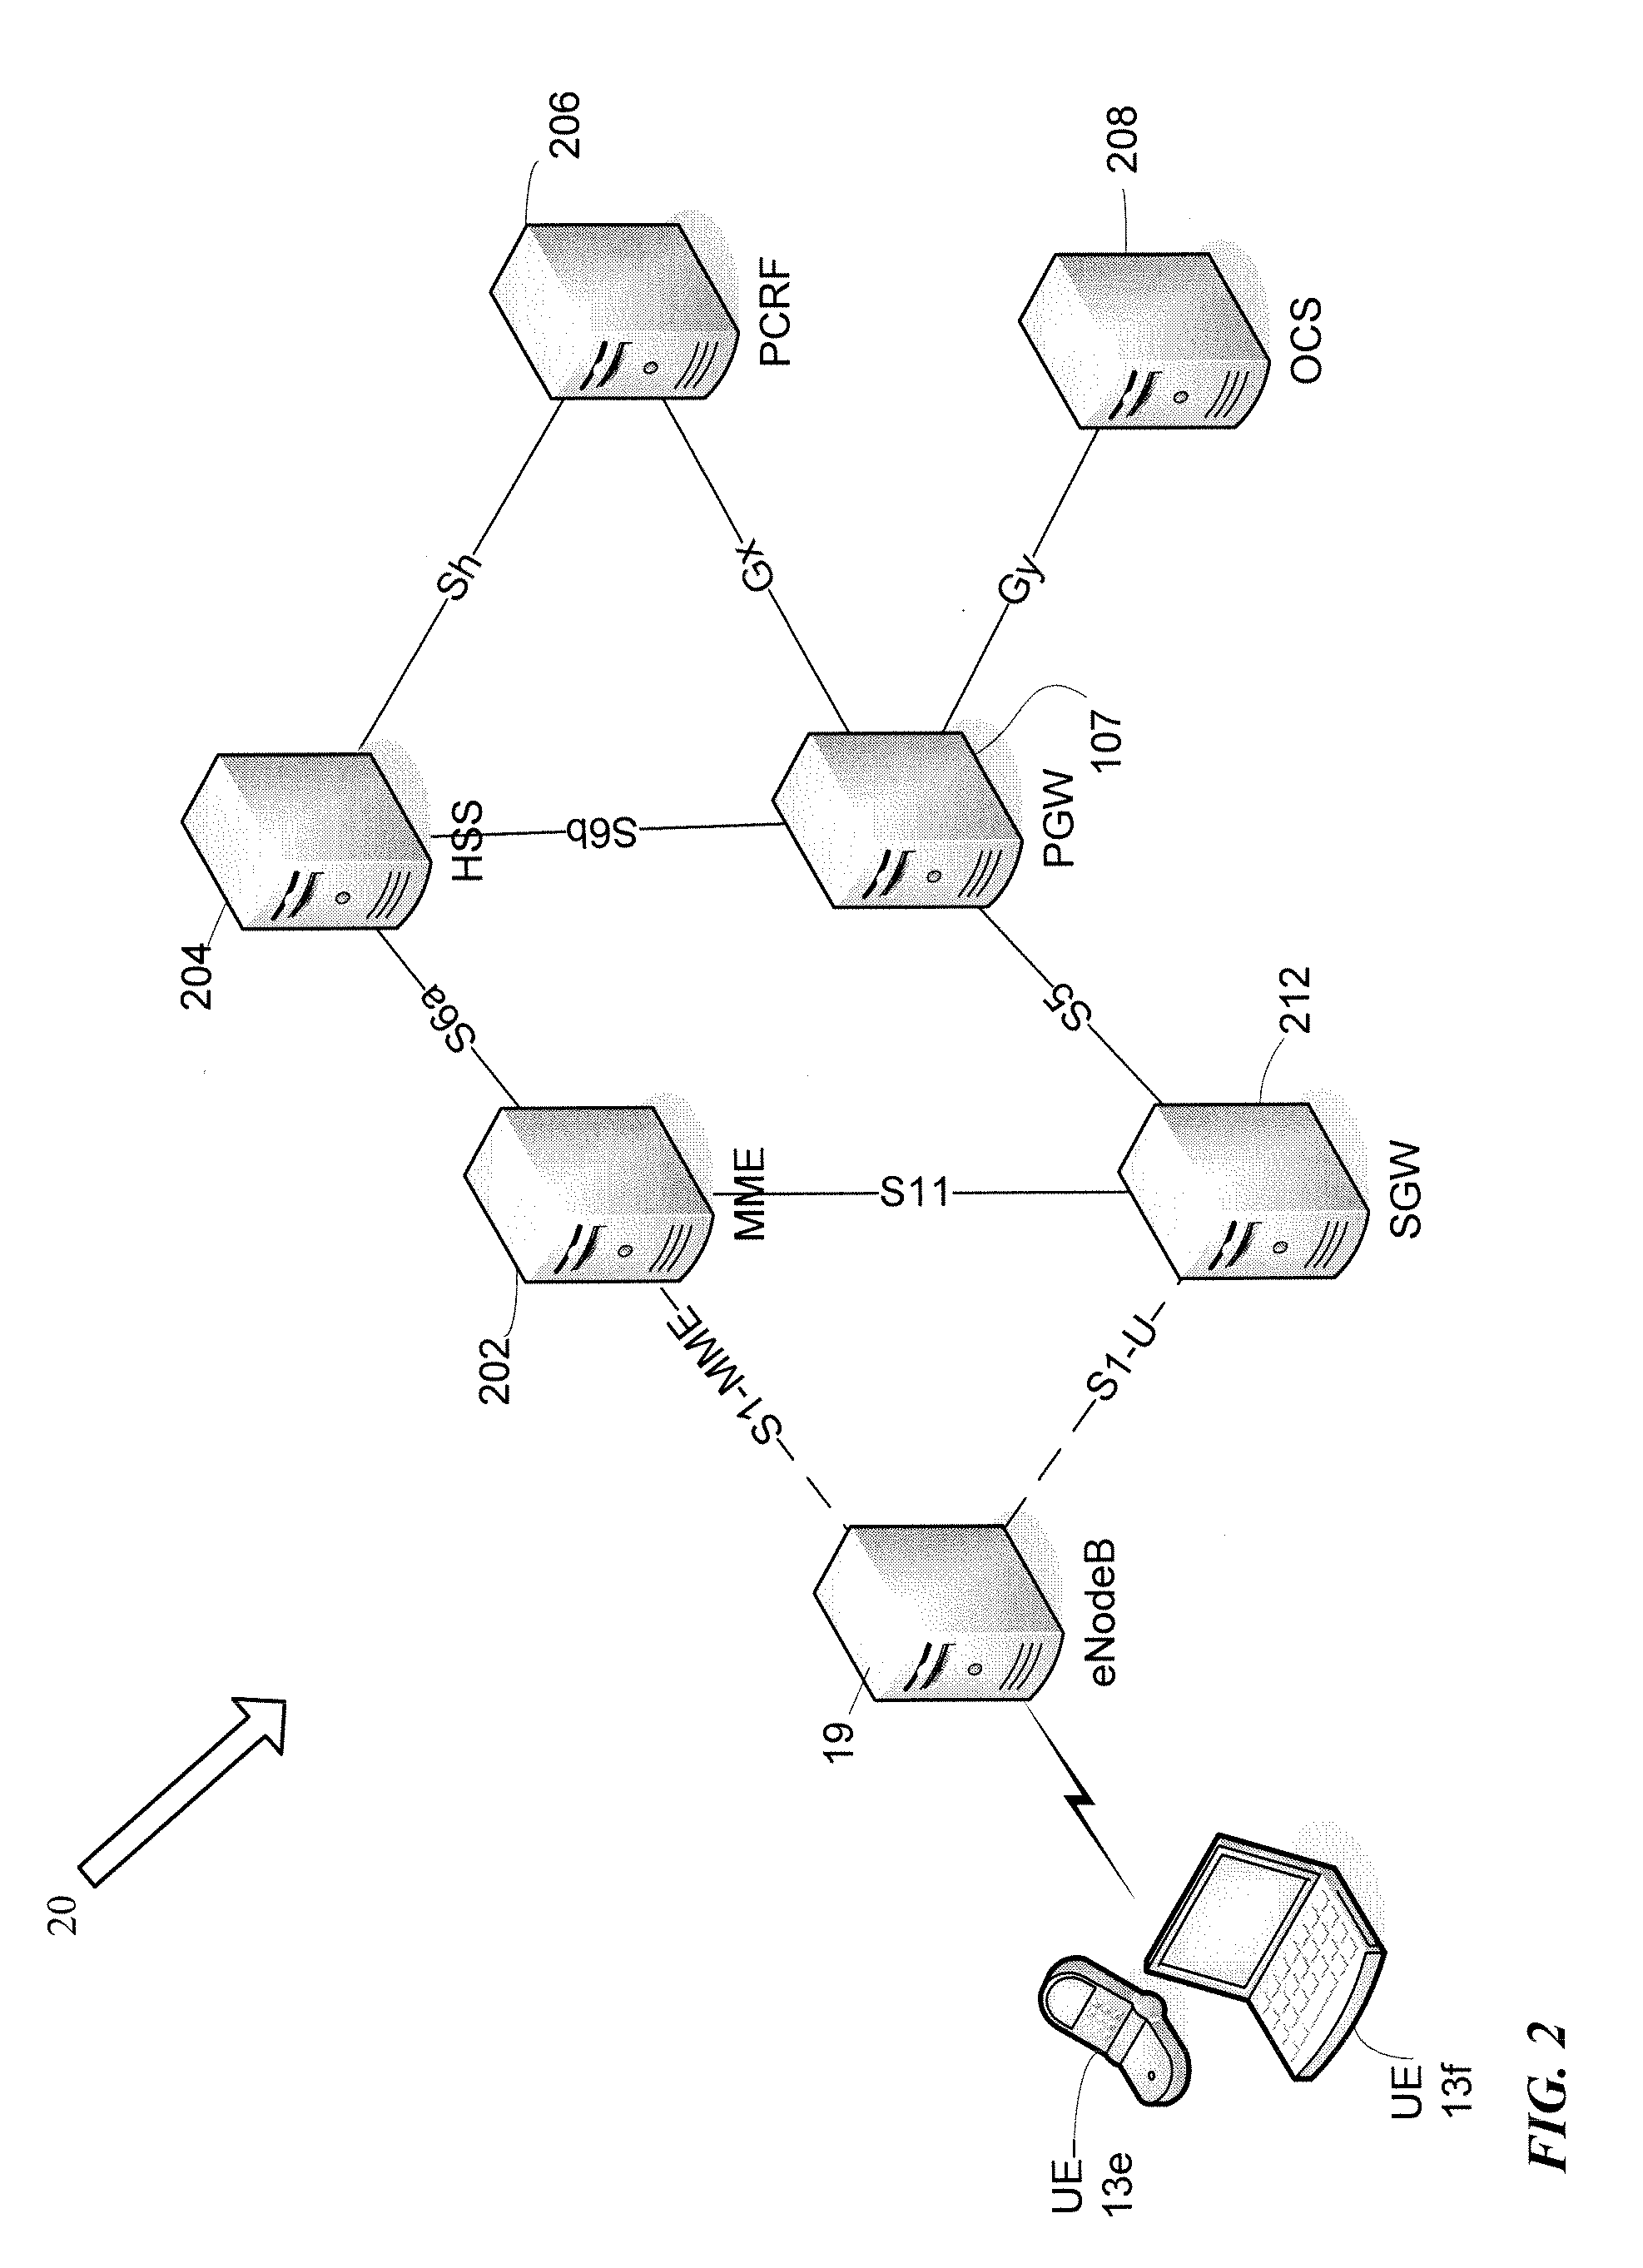 Method and system to provide network status information to a device